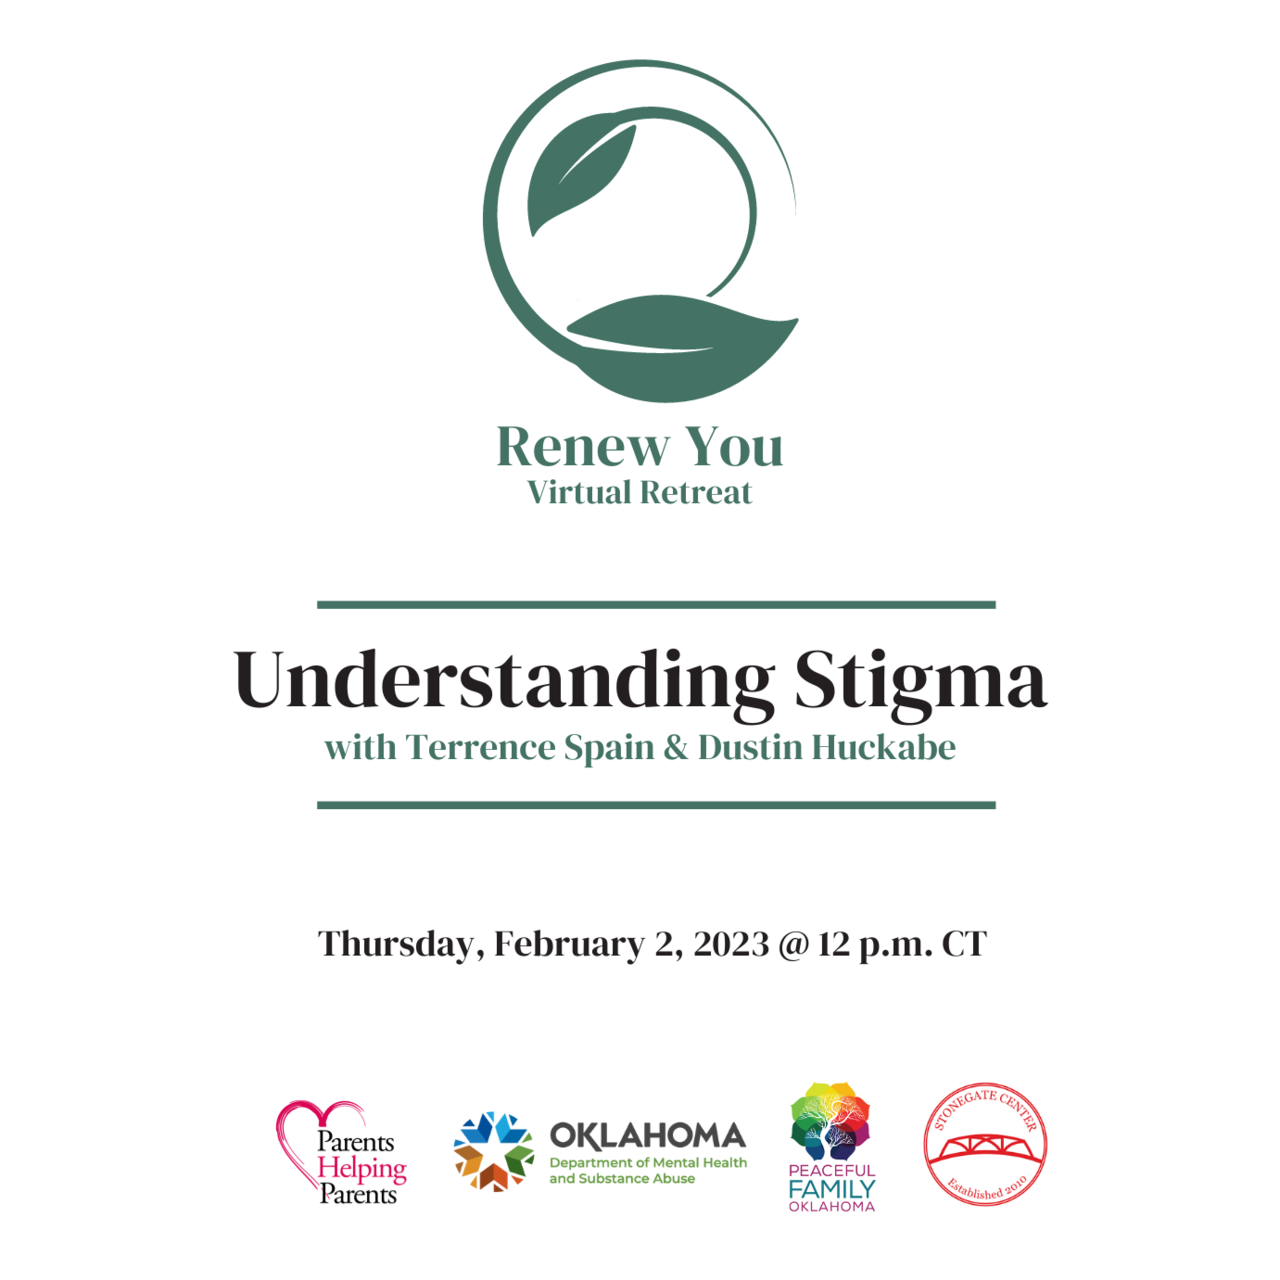 Renew You, Virtual Retreat for Caregivers Session, 